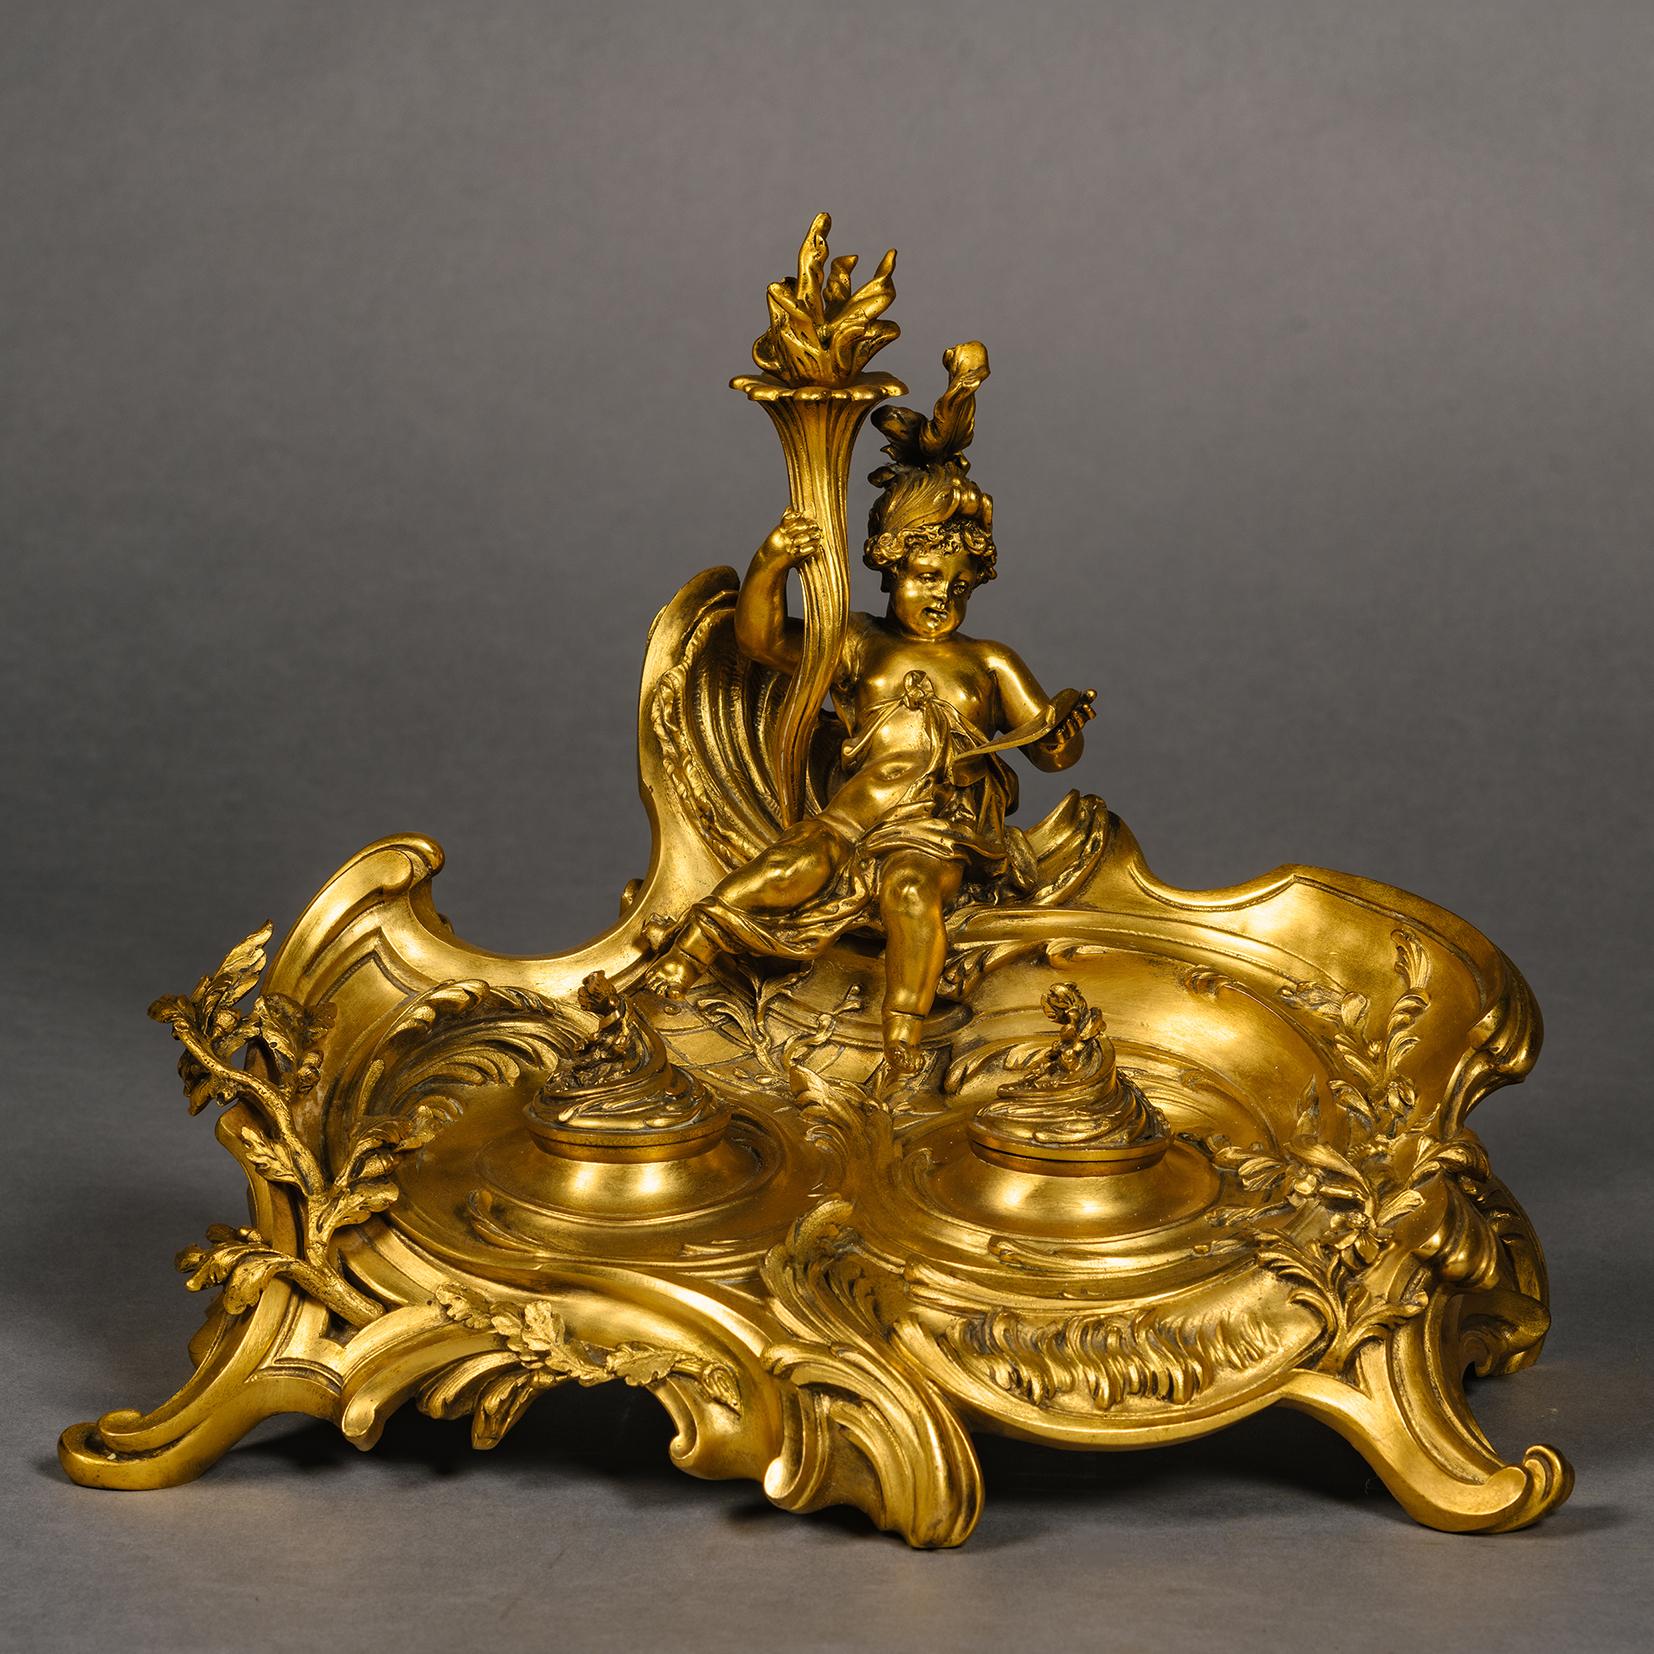 A Rare Louis XV Style Gilt-Bronze Inkwell. Designed by Léon Messagé and Cast By The Ferdinand Barbedienne Foundry, Paris. 

Designed in the exuberant Rococo style surmounted by a seated figure of cupid as the messenger of love, reading a tablet and